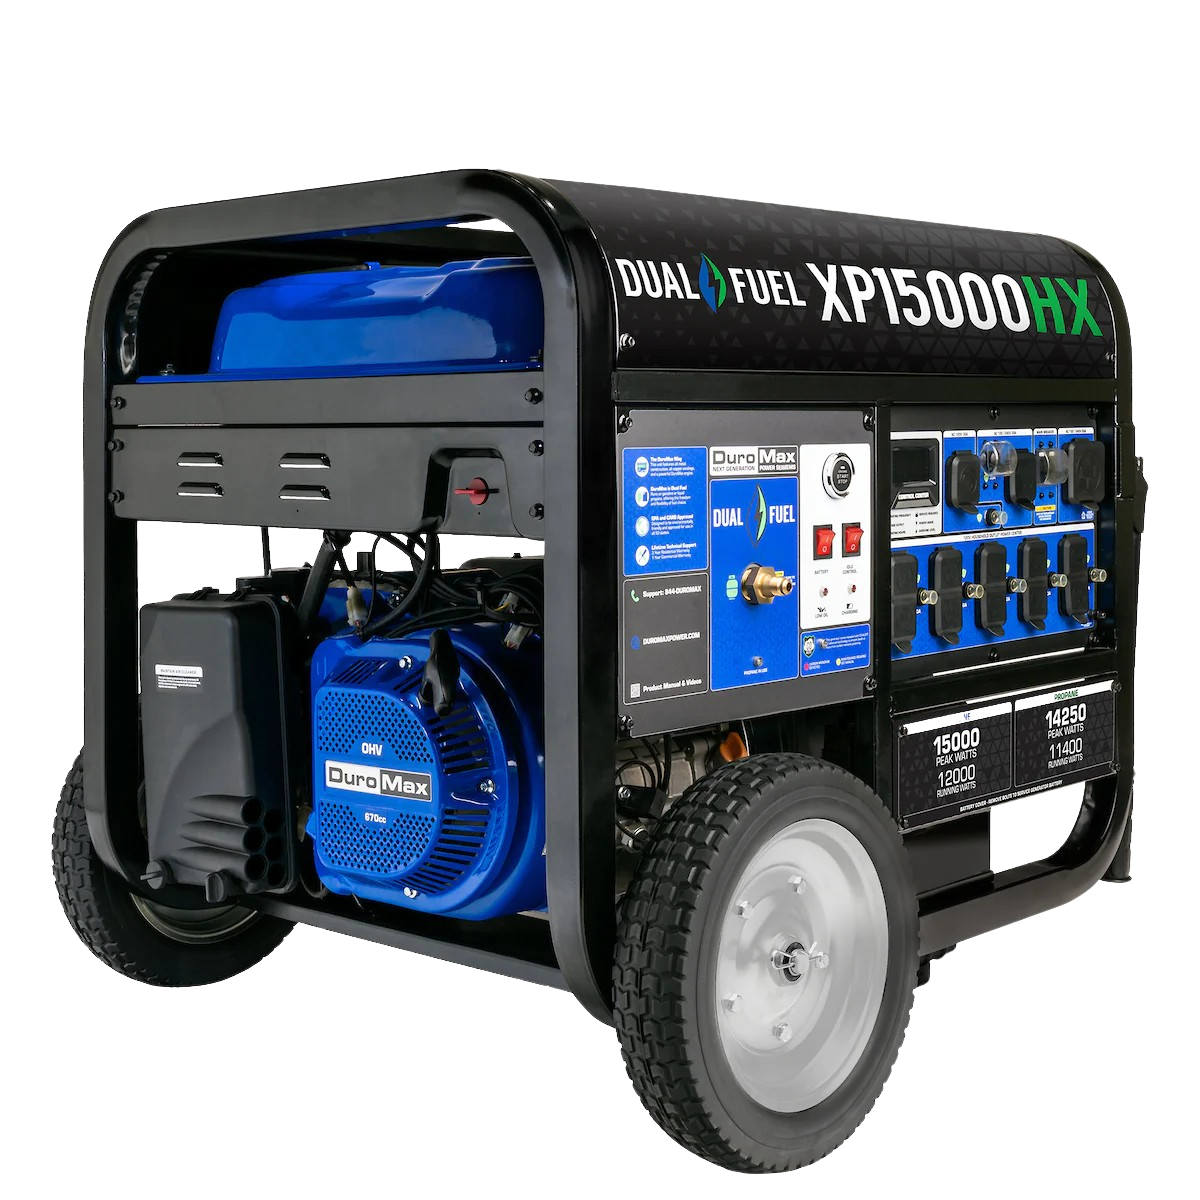 Duromax, DuroMax XP15000HX 12000W/15000W Dual Fuel Gas Propane Generator with Remote Start and CO Alert New